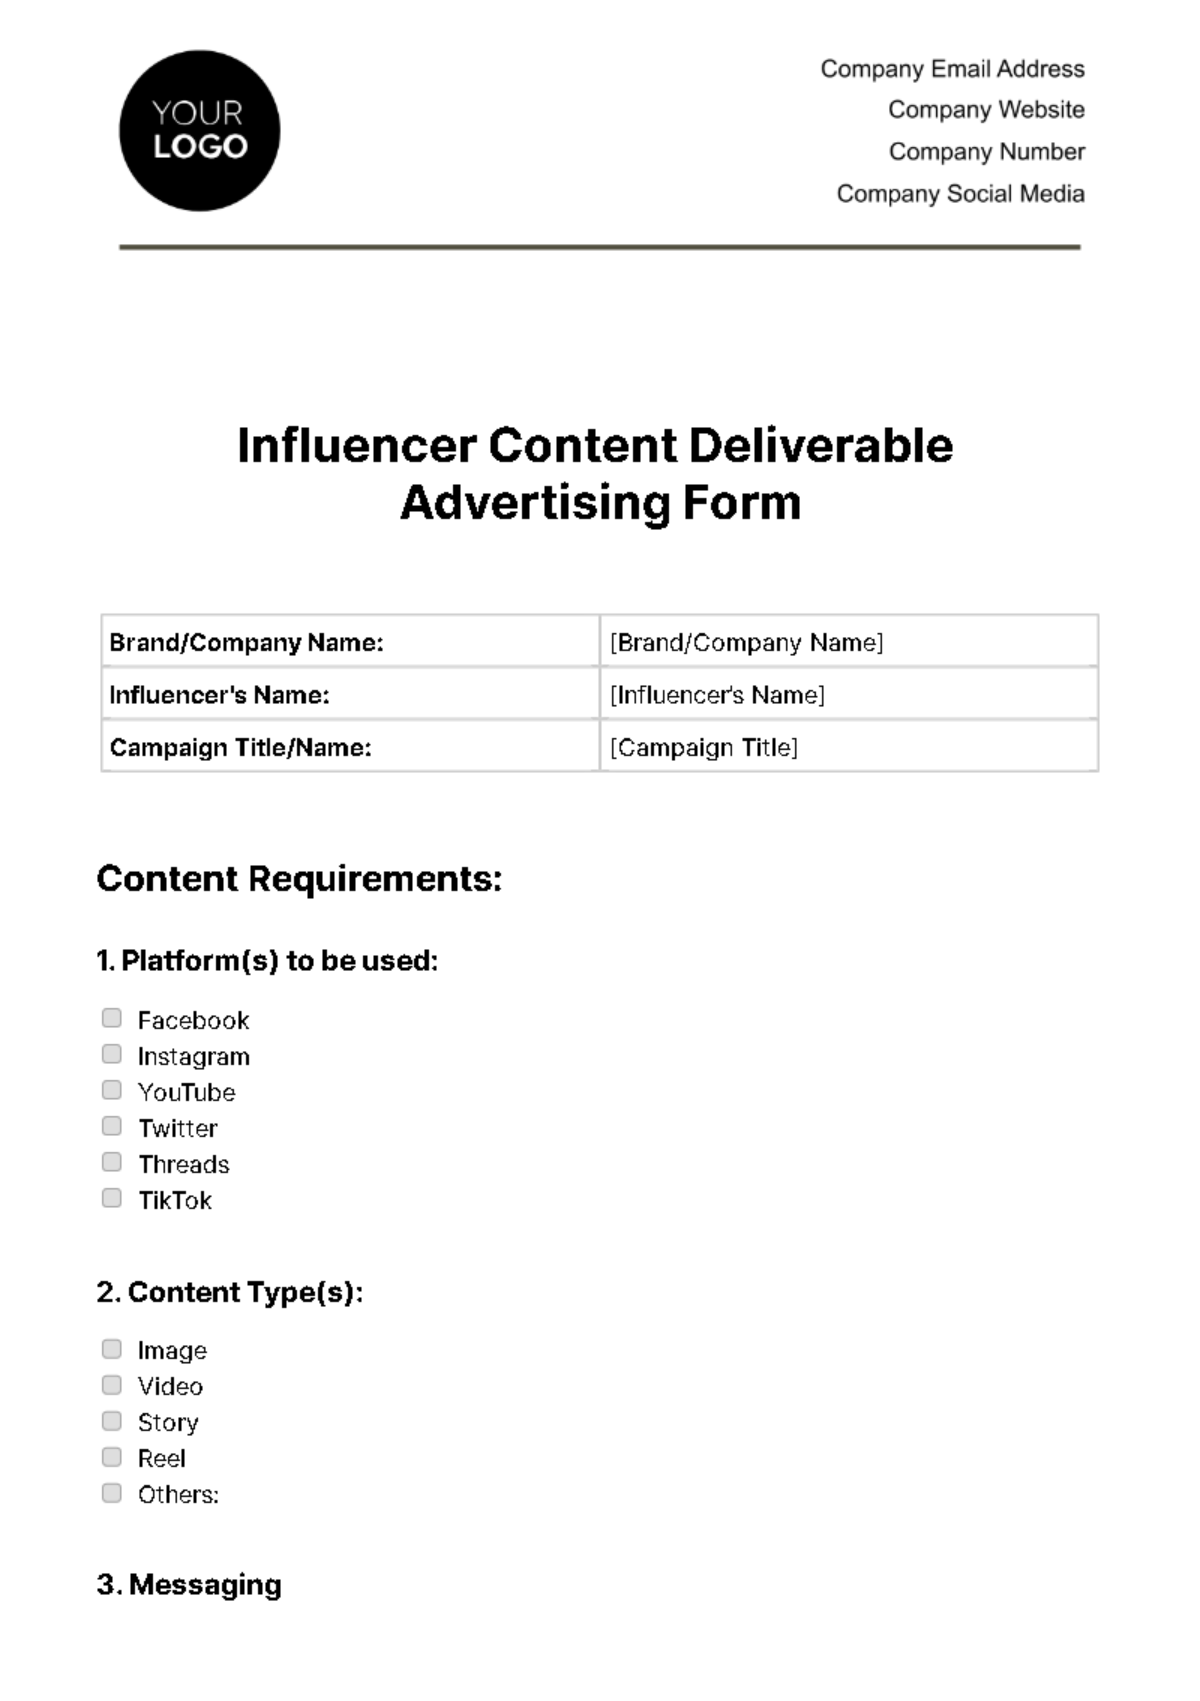 Influencer Content Deliverable Advertising Form Template